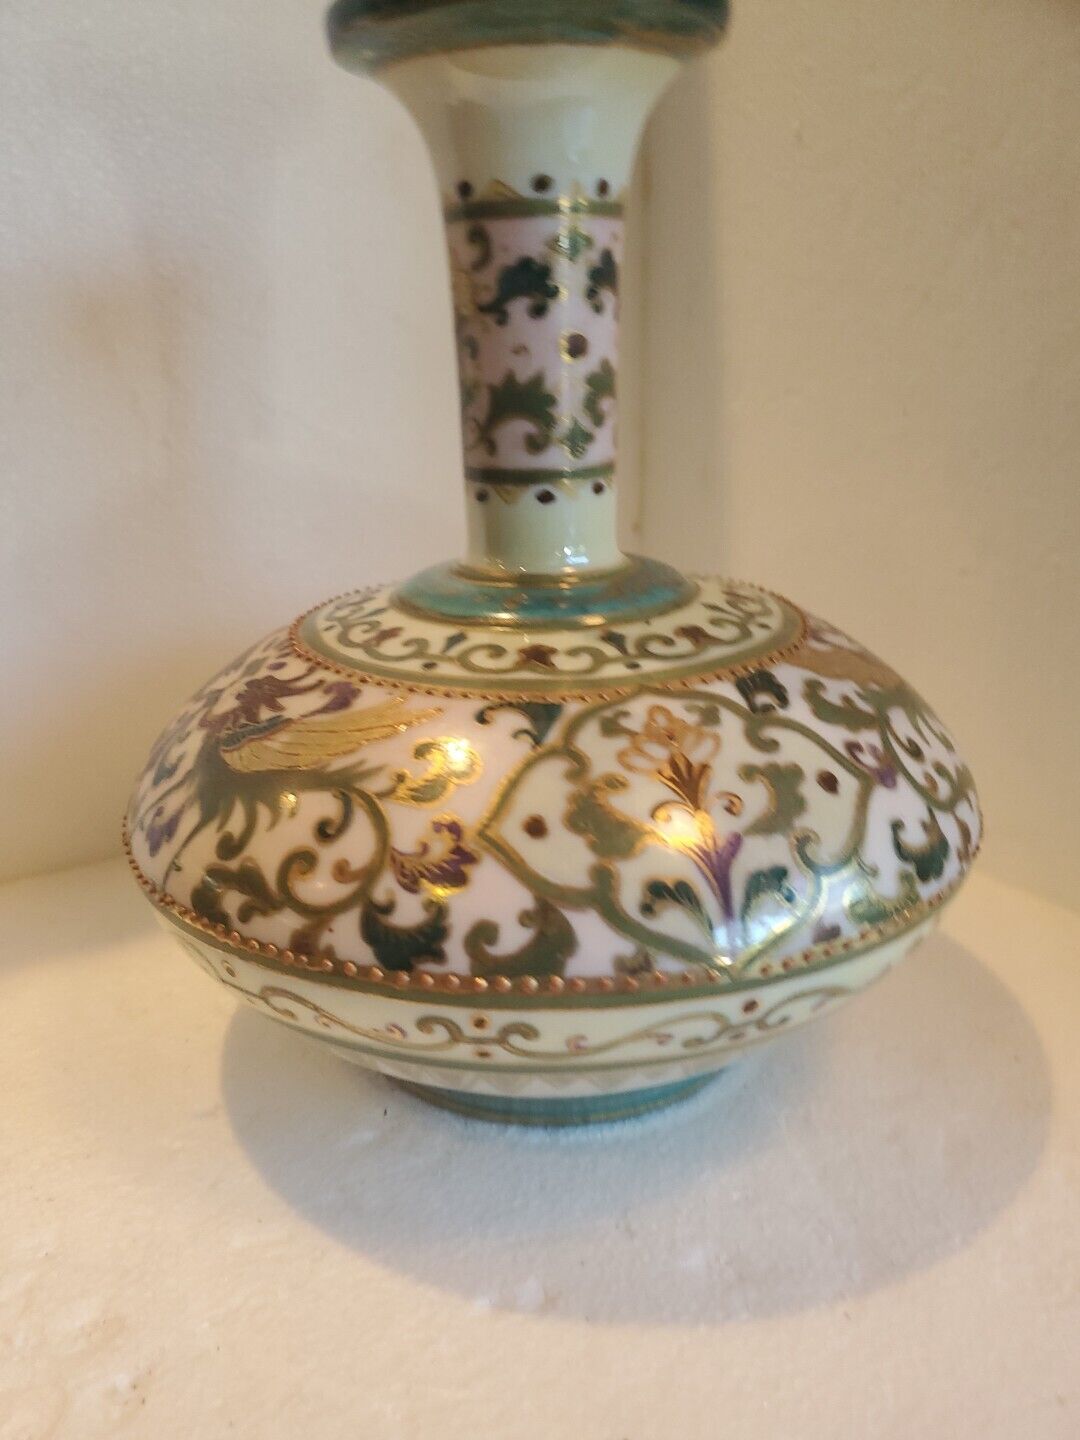 Vase Ceramic Hand Painted w/ Gold Colored Gilding Little Known About It